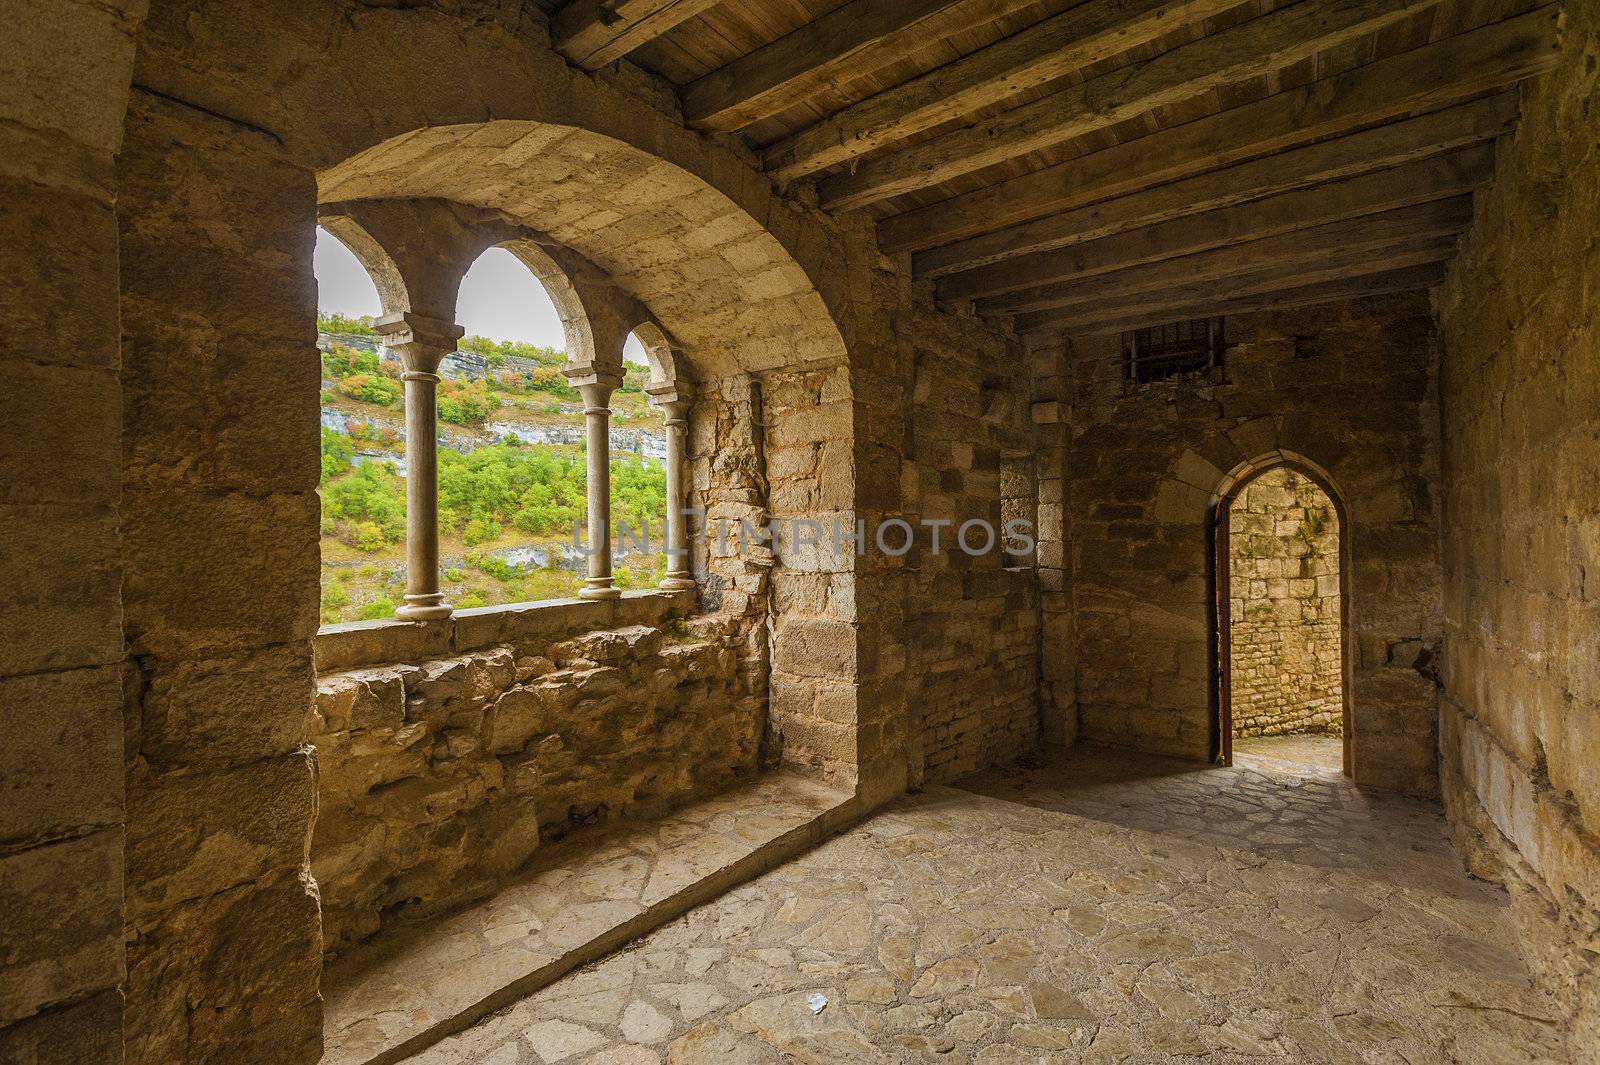 Interior window and door arches in medieval French castle